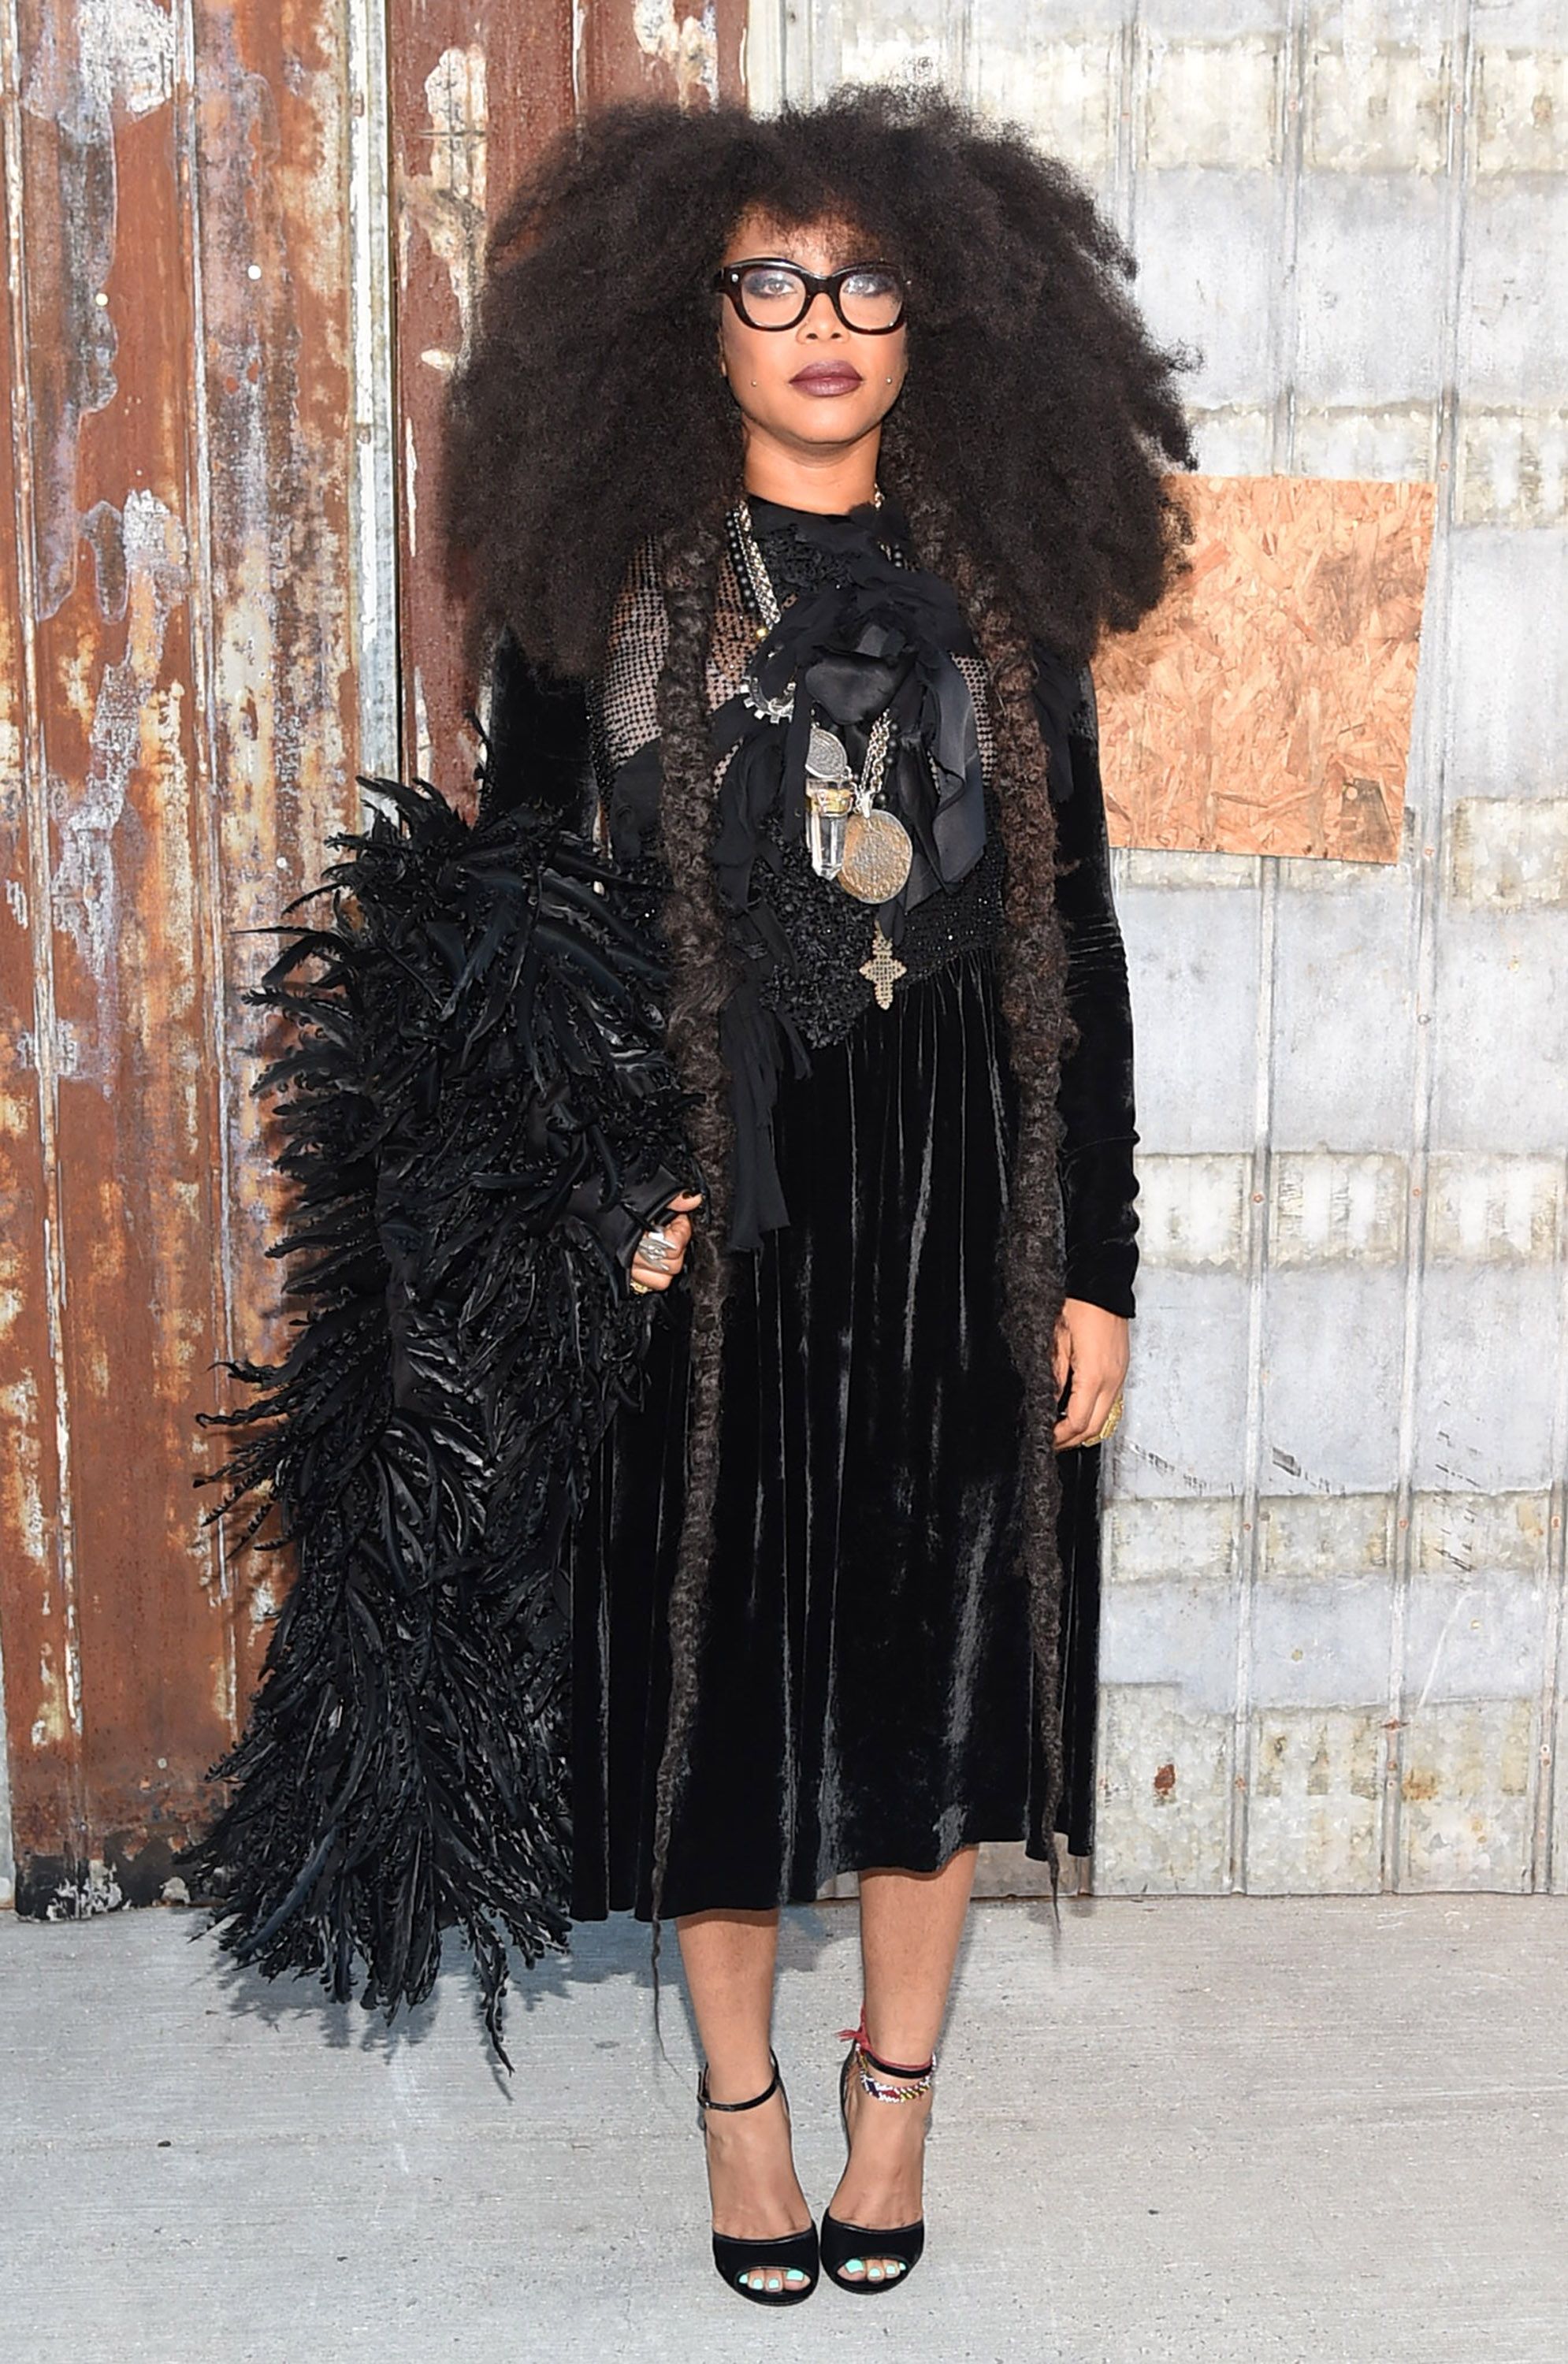 Erykah Badu at the Givenchy fashion show on September 11, 2015 in New York. | Photo: Getty Images